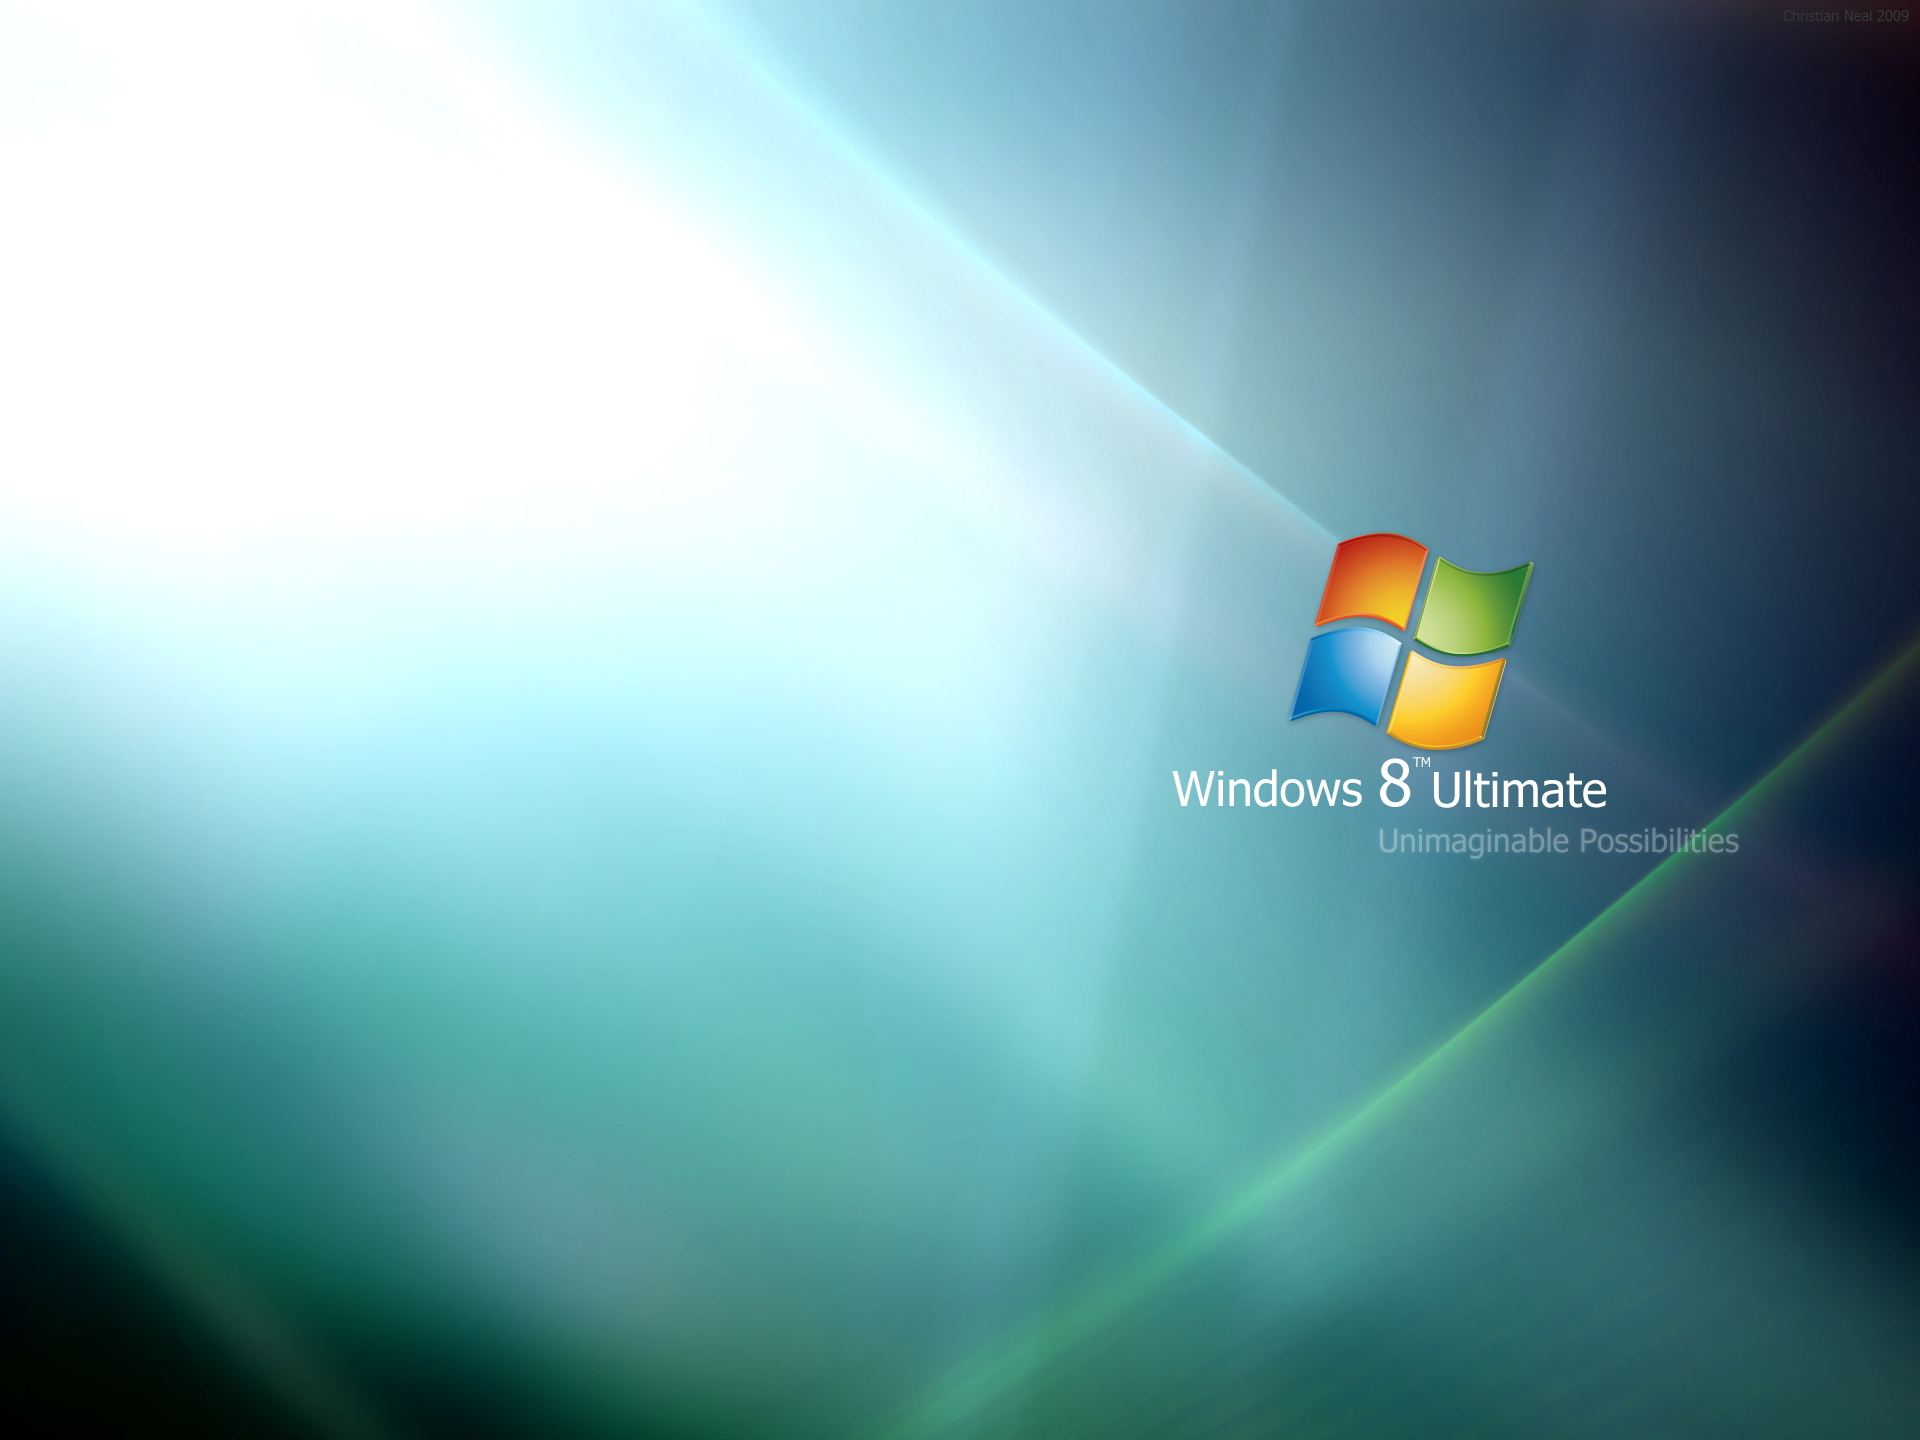 Download Microsoft Windows 8 Wallpapers Pack 1   wallpapers   TechMynd